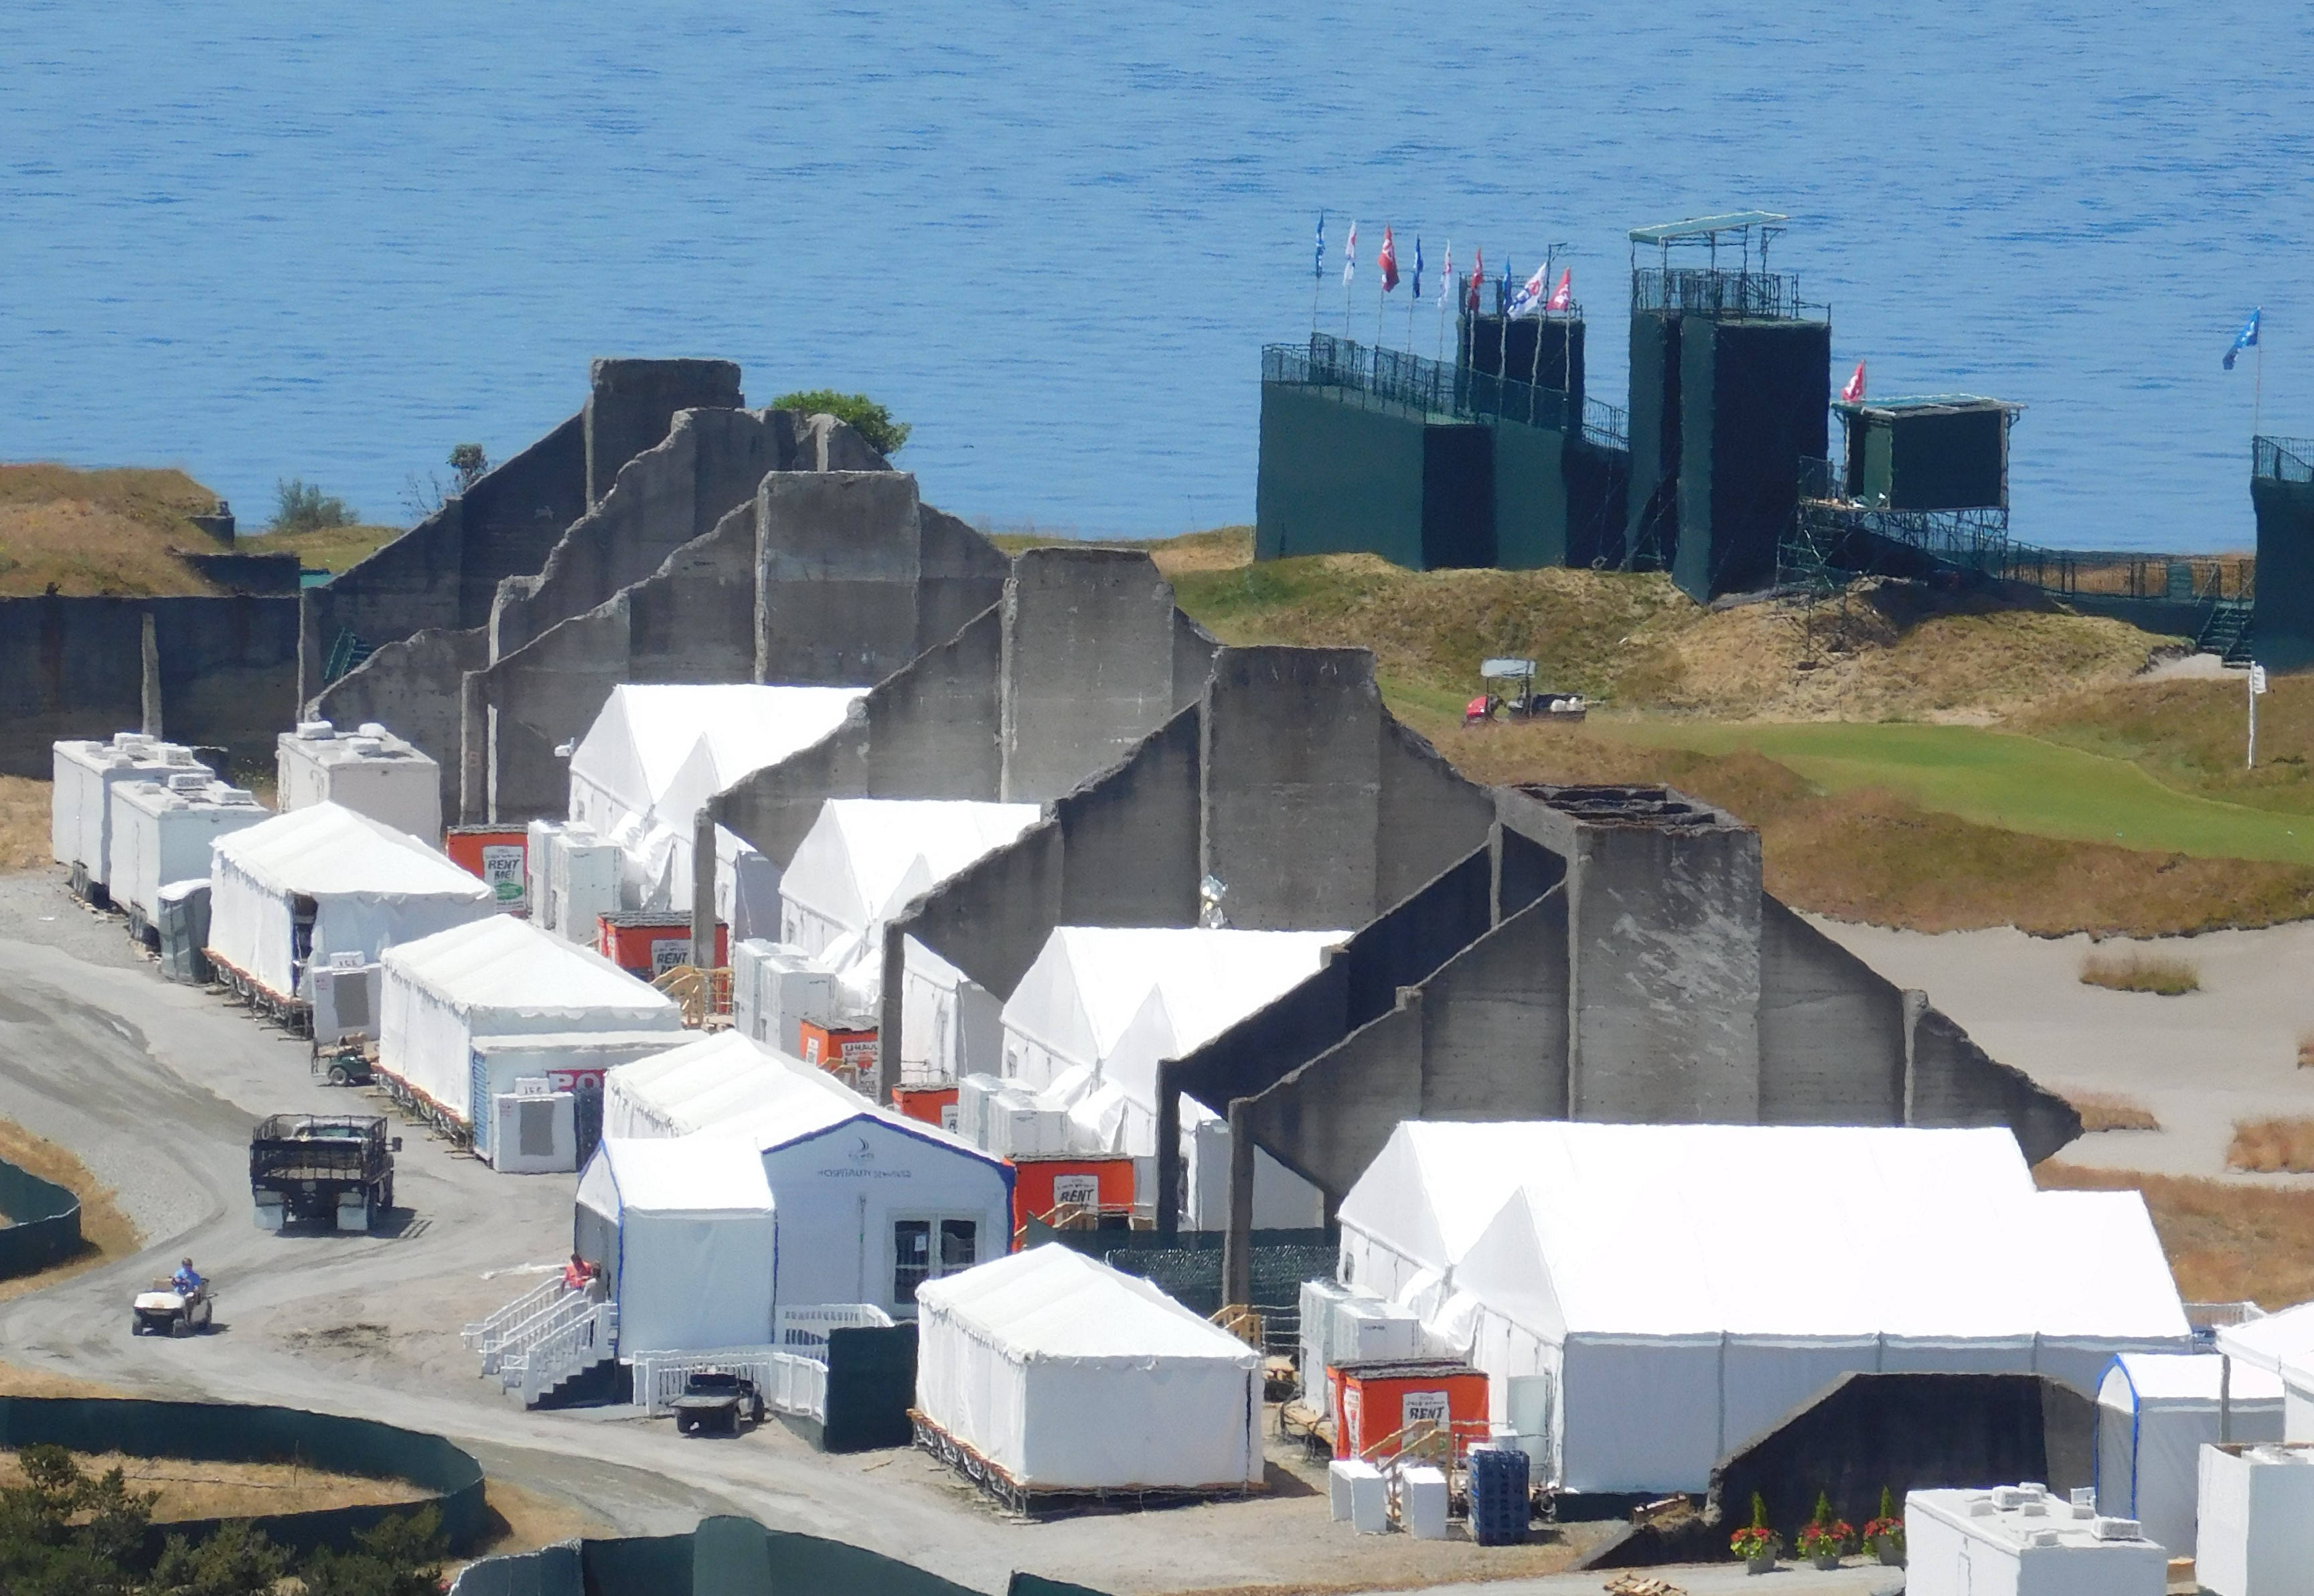 PGA Used 70 U-Box Containers for U.S. Open at Chambers Bay